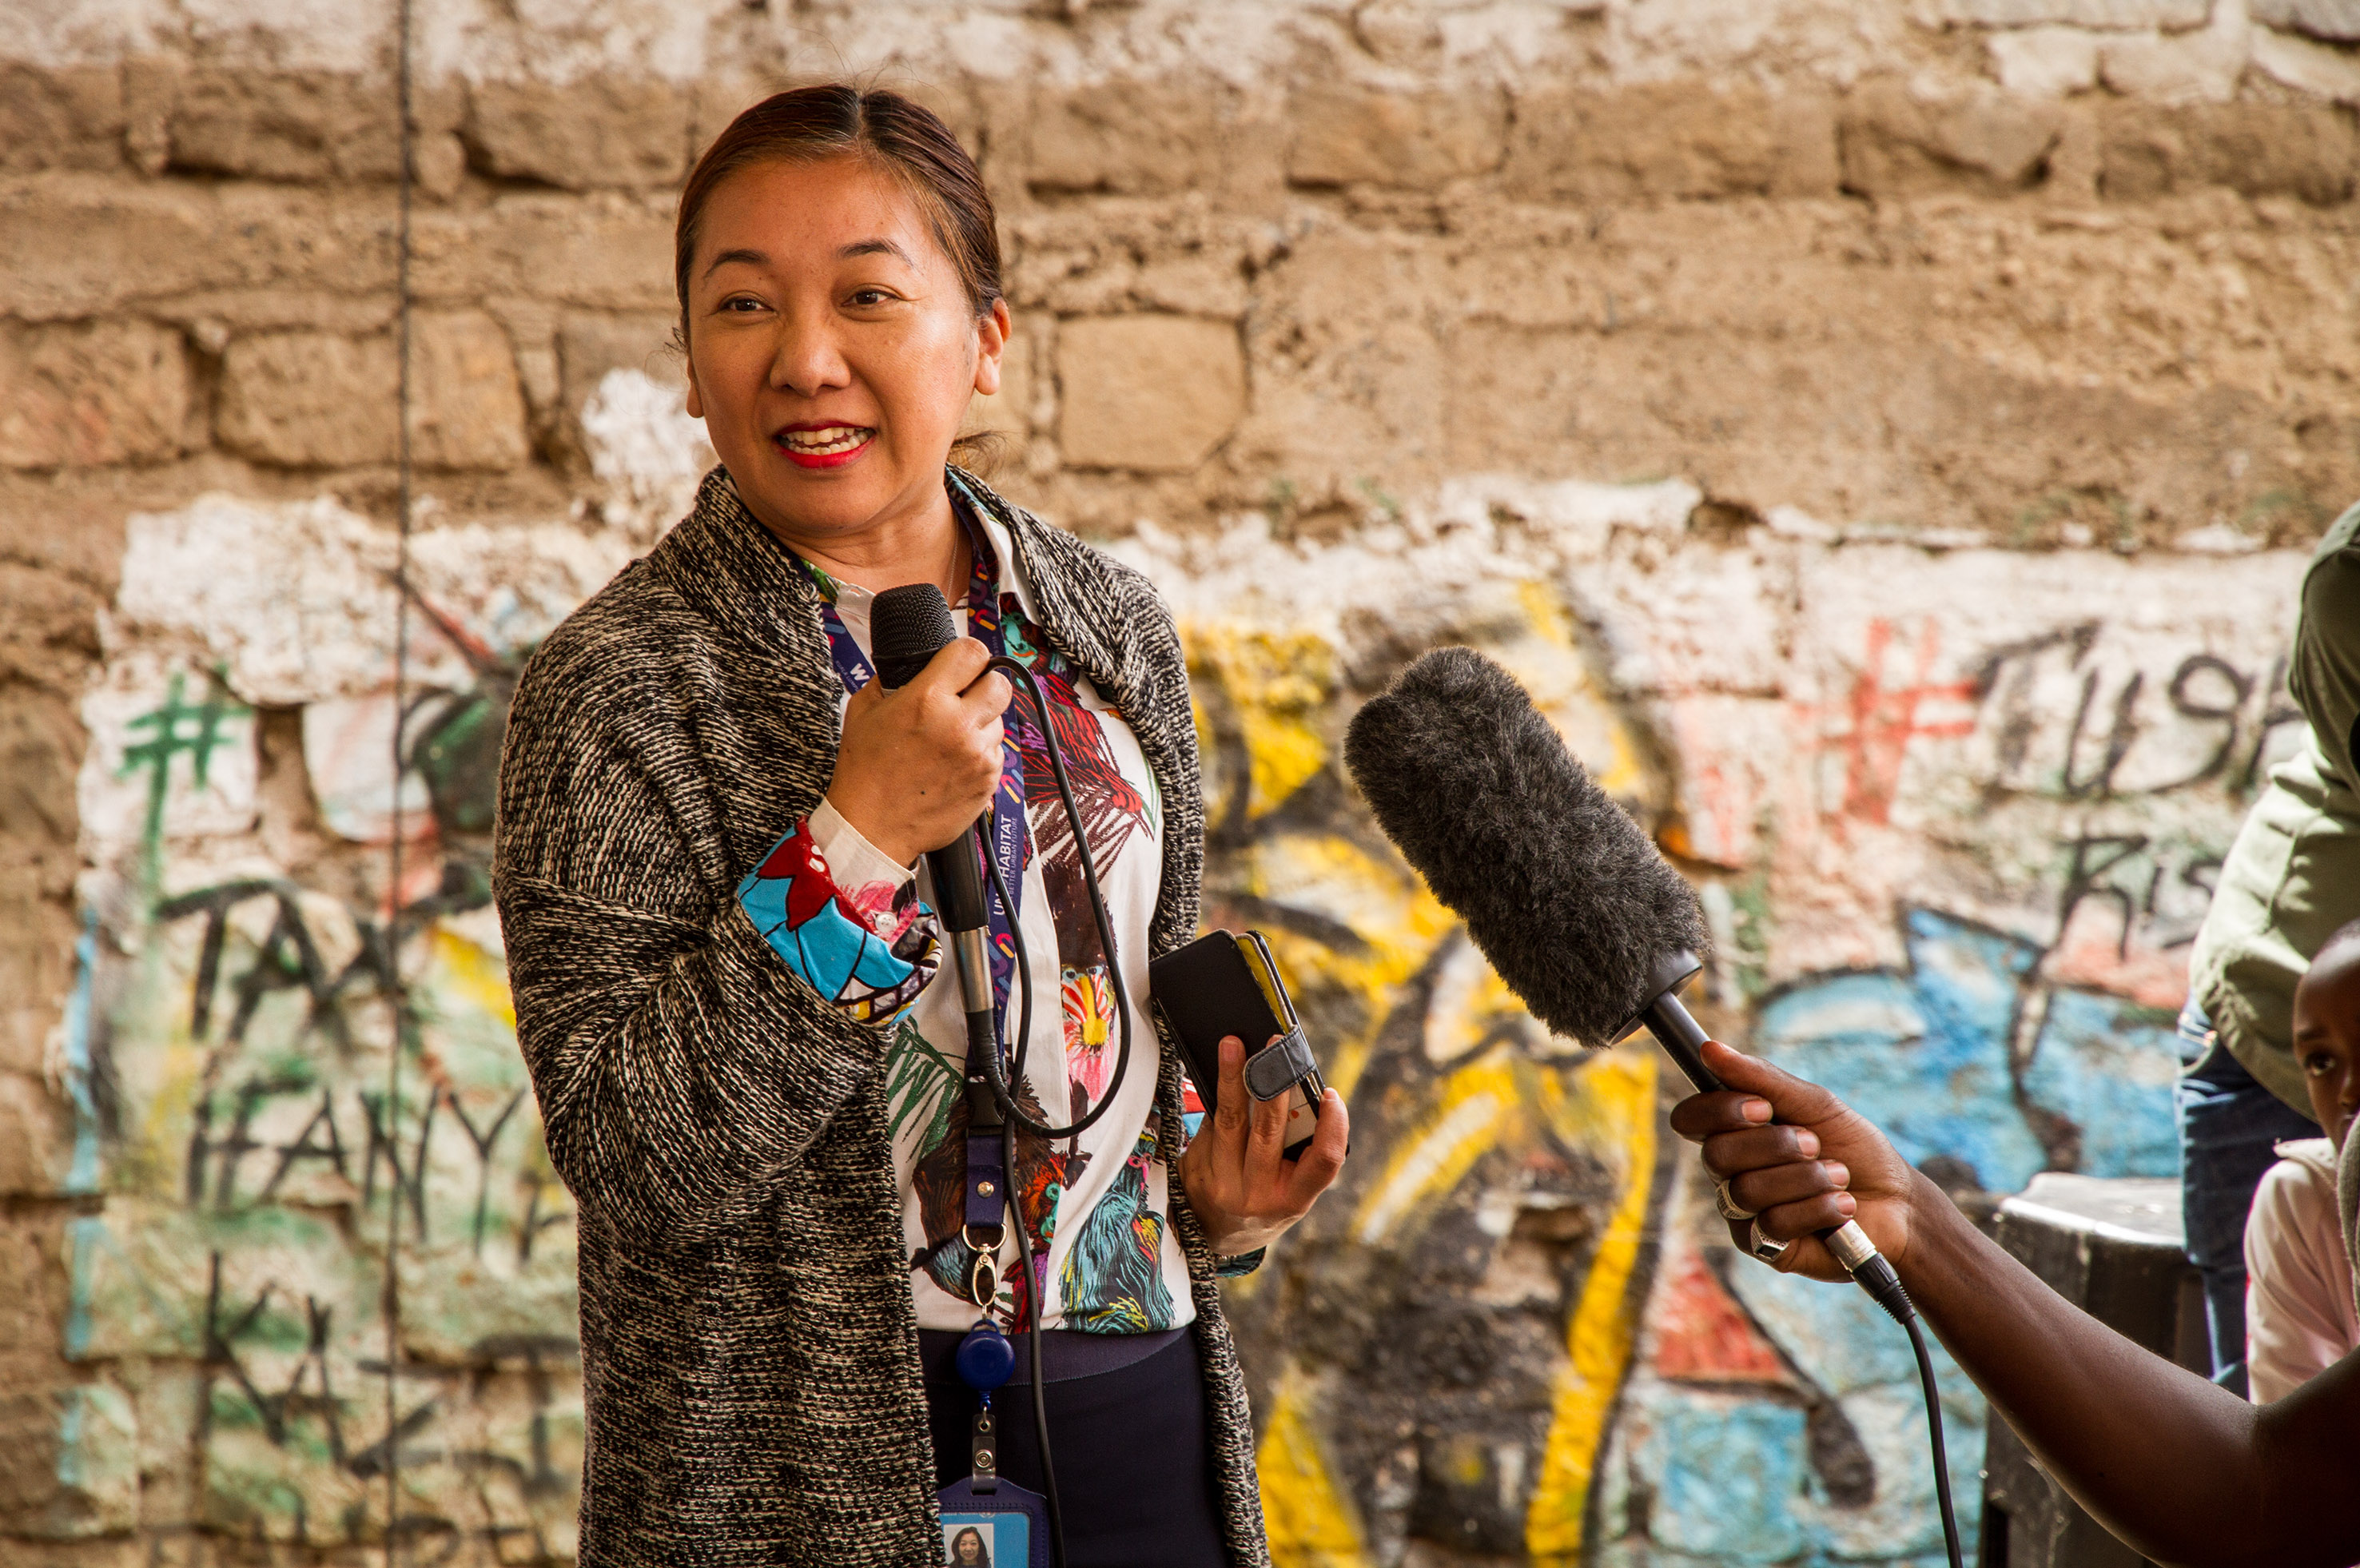 Kazumi Ogawa, UN-Habitat Chief of Staff, at the opening of The Children's Space in Mathare